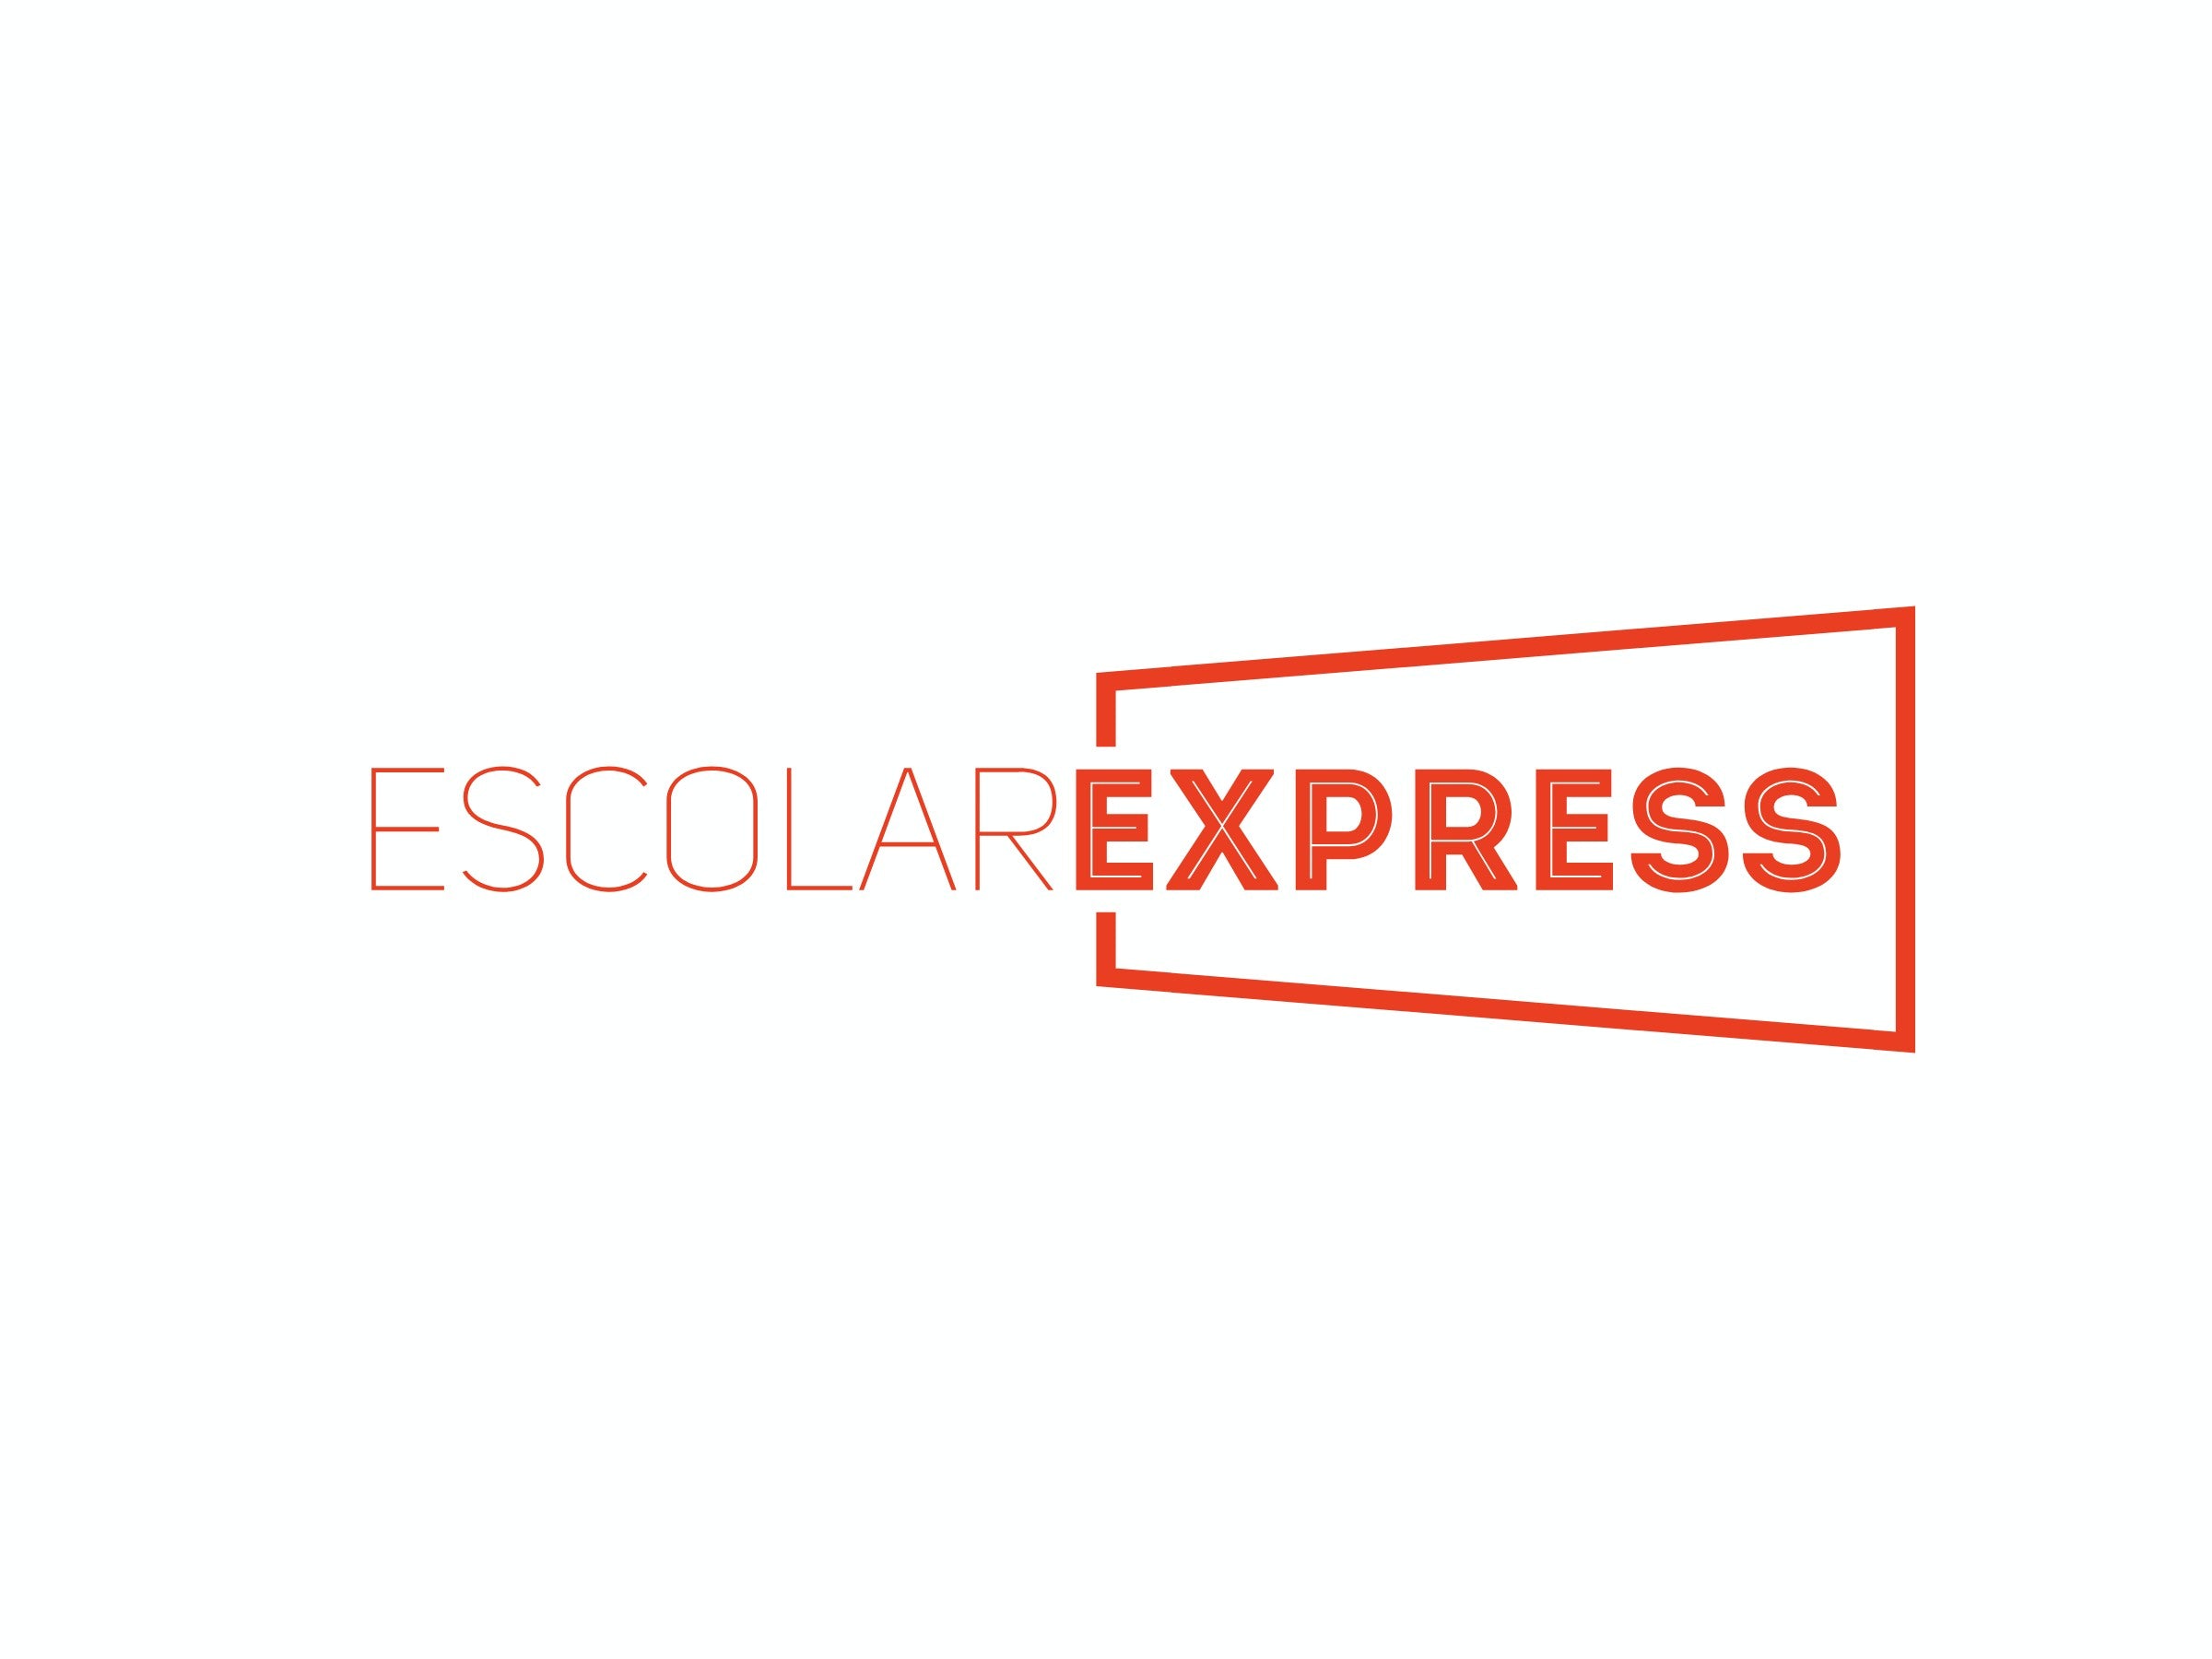 Load video: Institutional video of Escolar Express